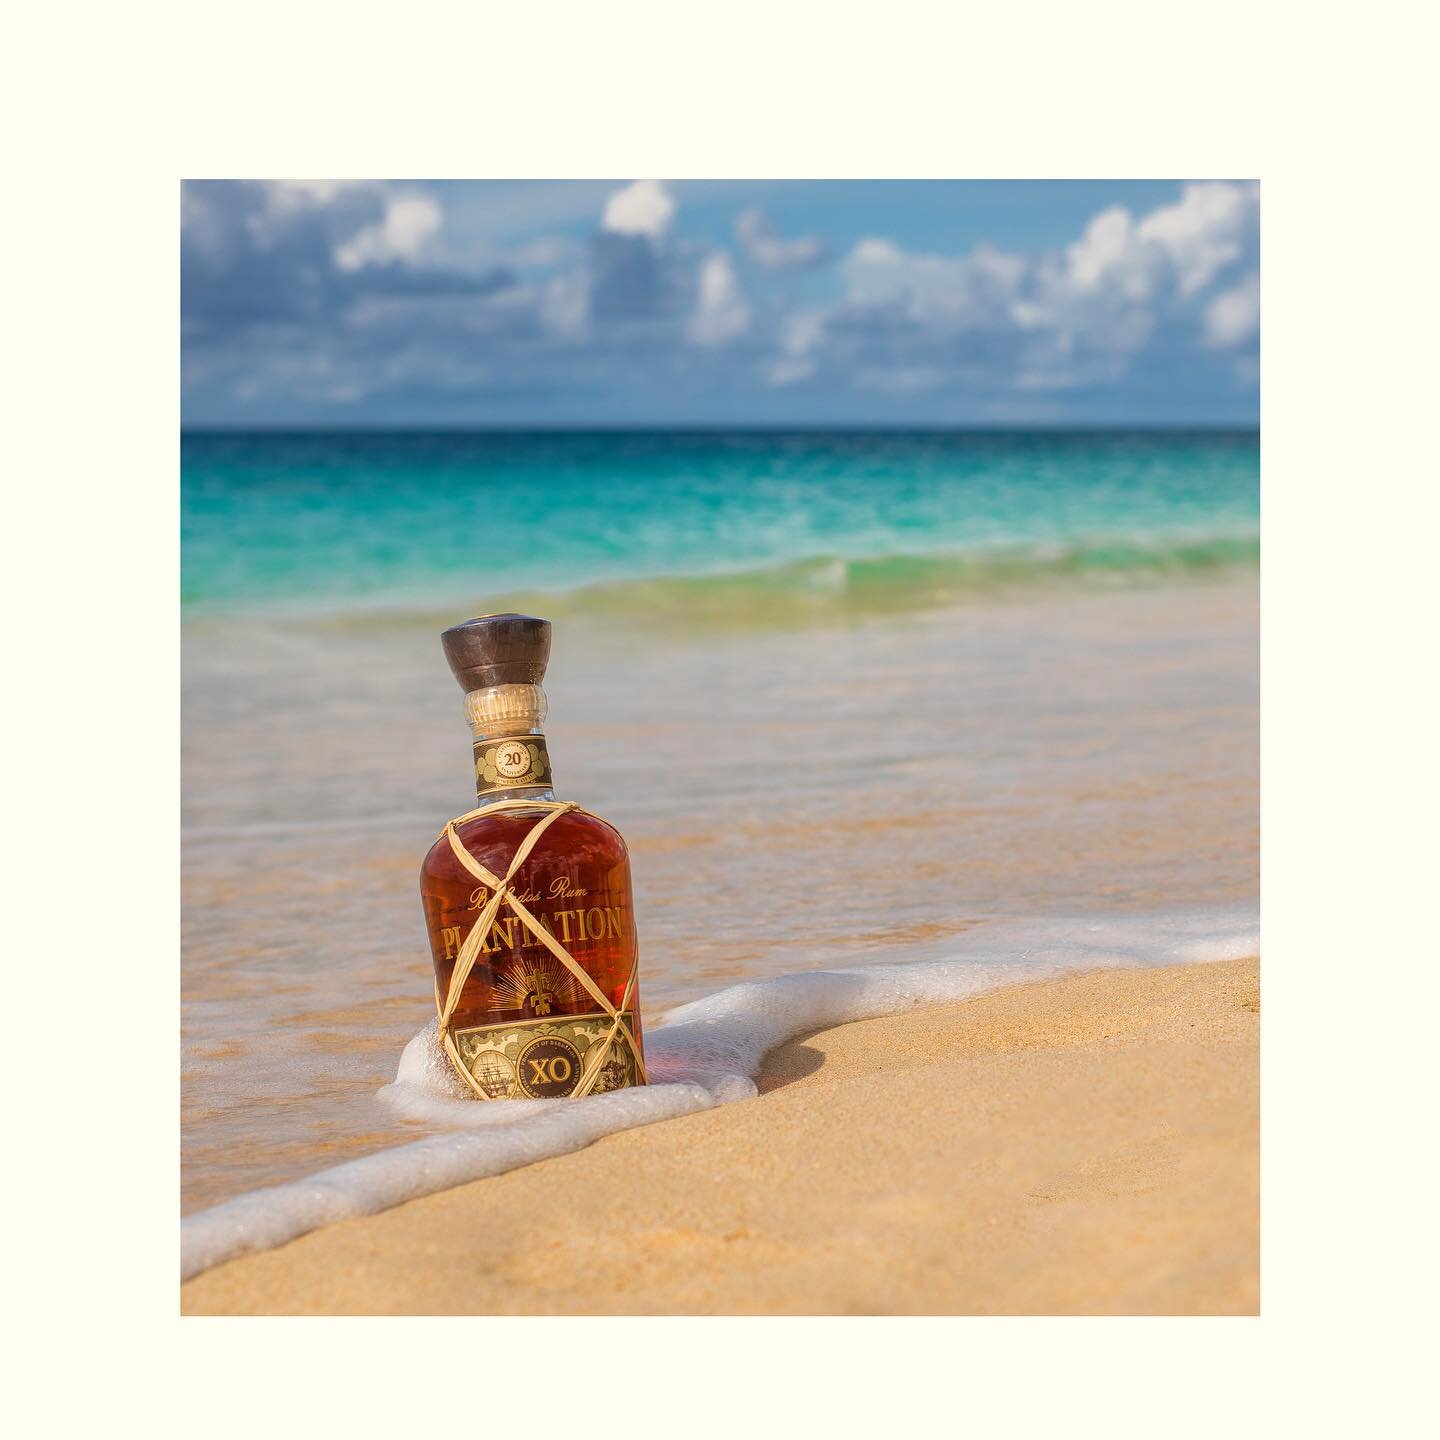 Today should be the last day before a week full of rain. 

We hope you all enjoy a relaxing evening with a nice dram of XO in your garden, your nearest green space or for the lucky ones by the seaside. 

#PlantationRum #Plantation20th #barbados #rum 